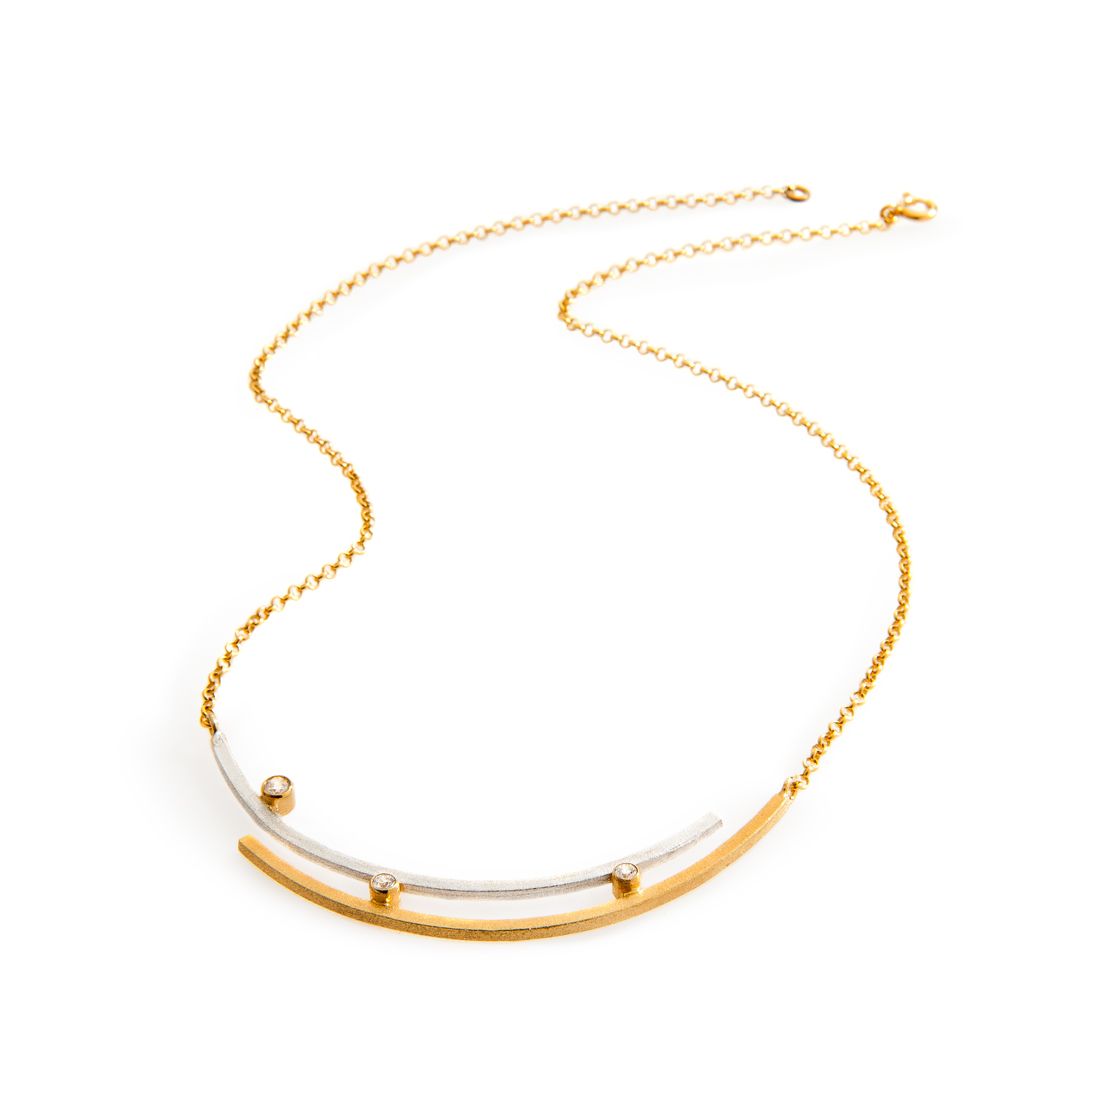 Three zircon stones set in gold and perfectly balanced between silver and gold waves, suspended by an elegant gold chain.